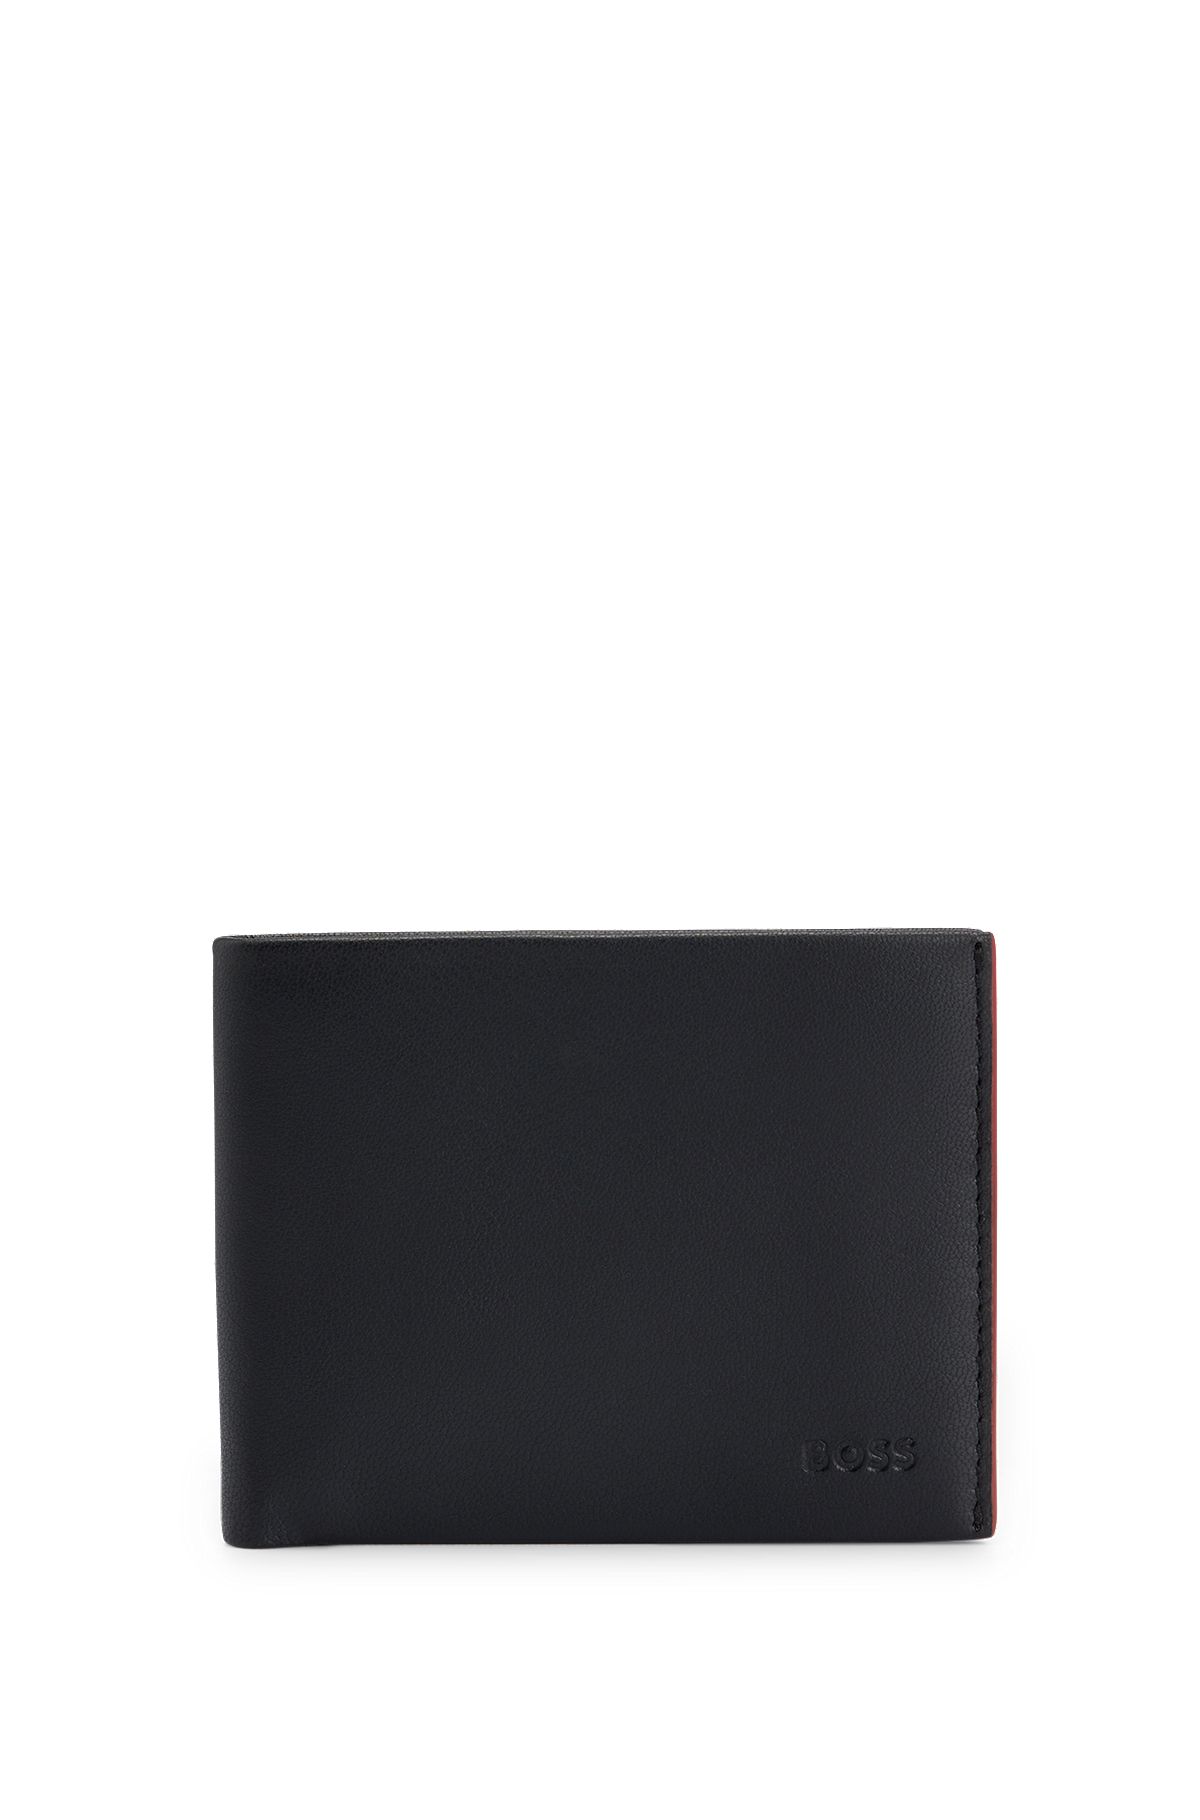 Logo-embossed leather wallet with six card slots, Black